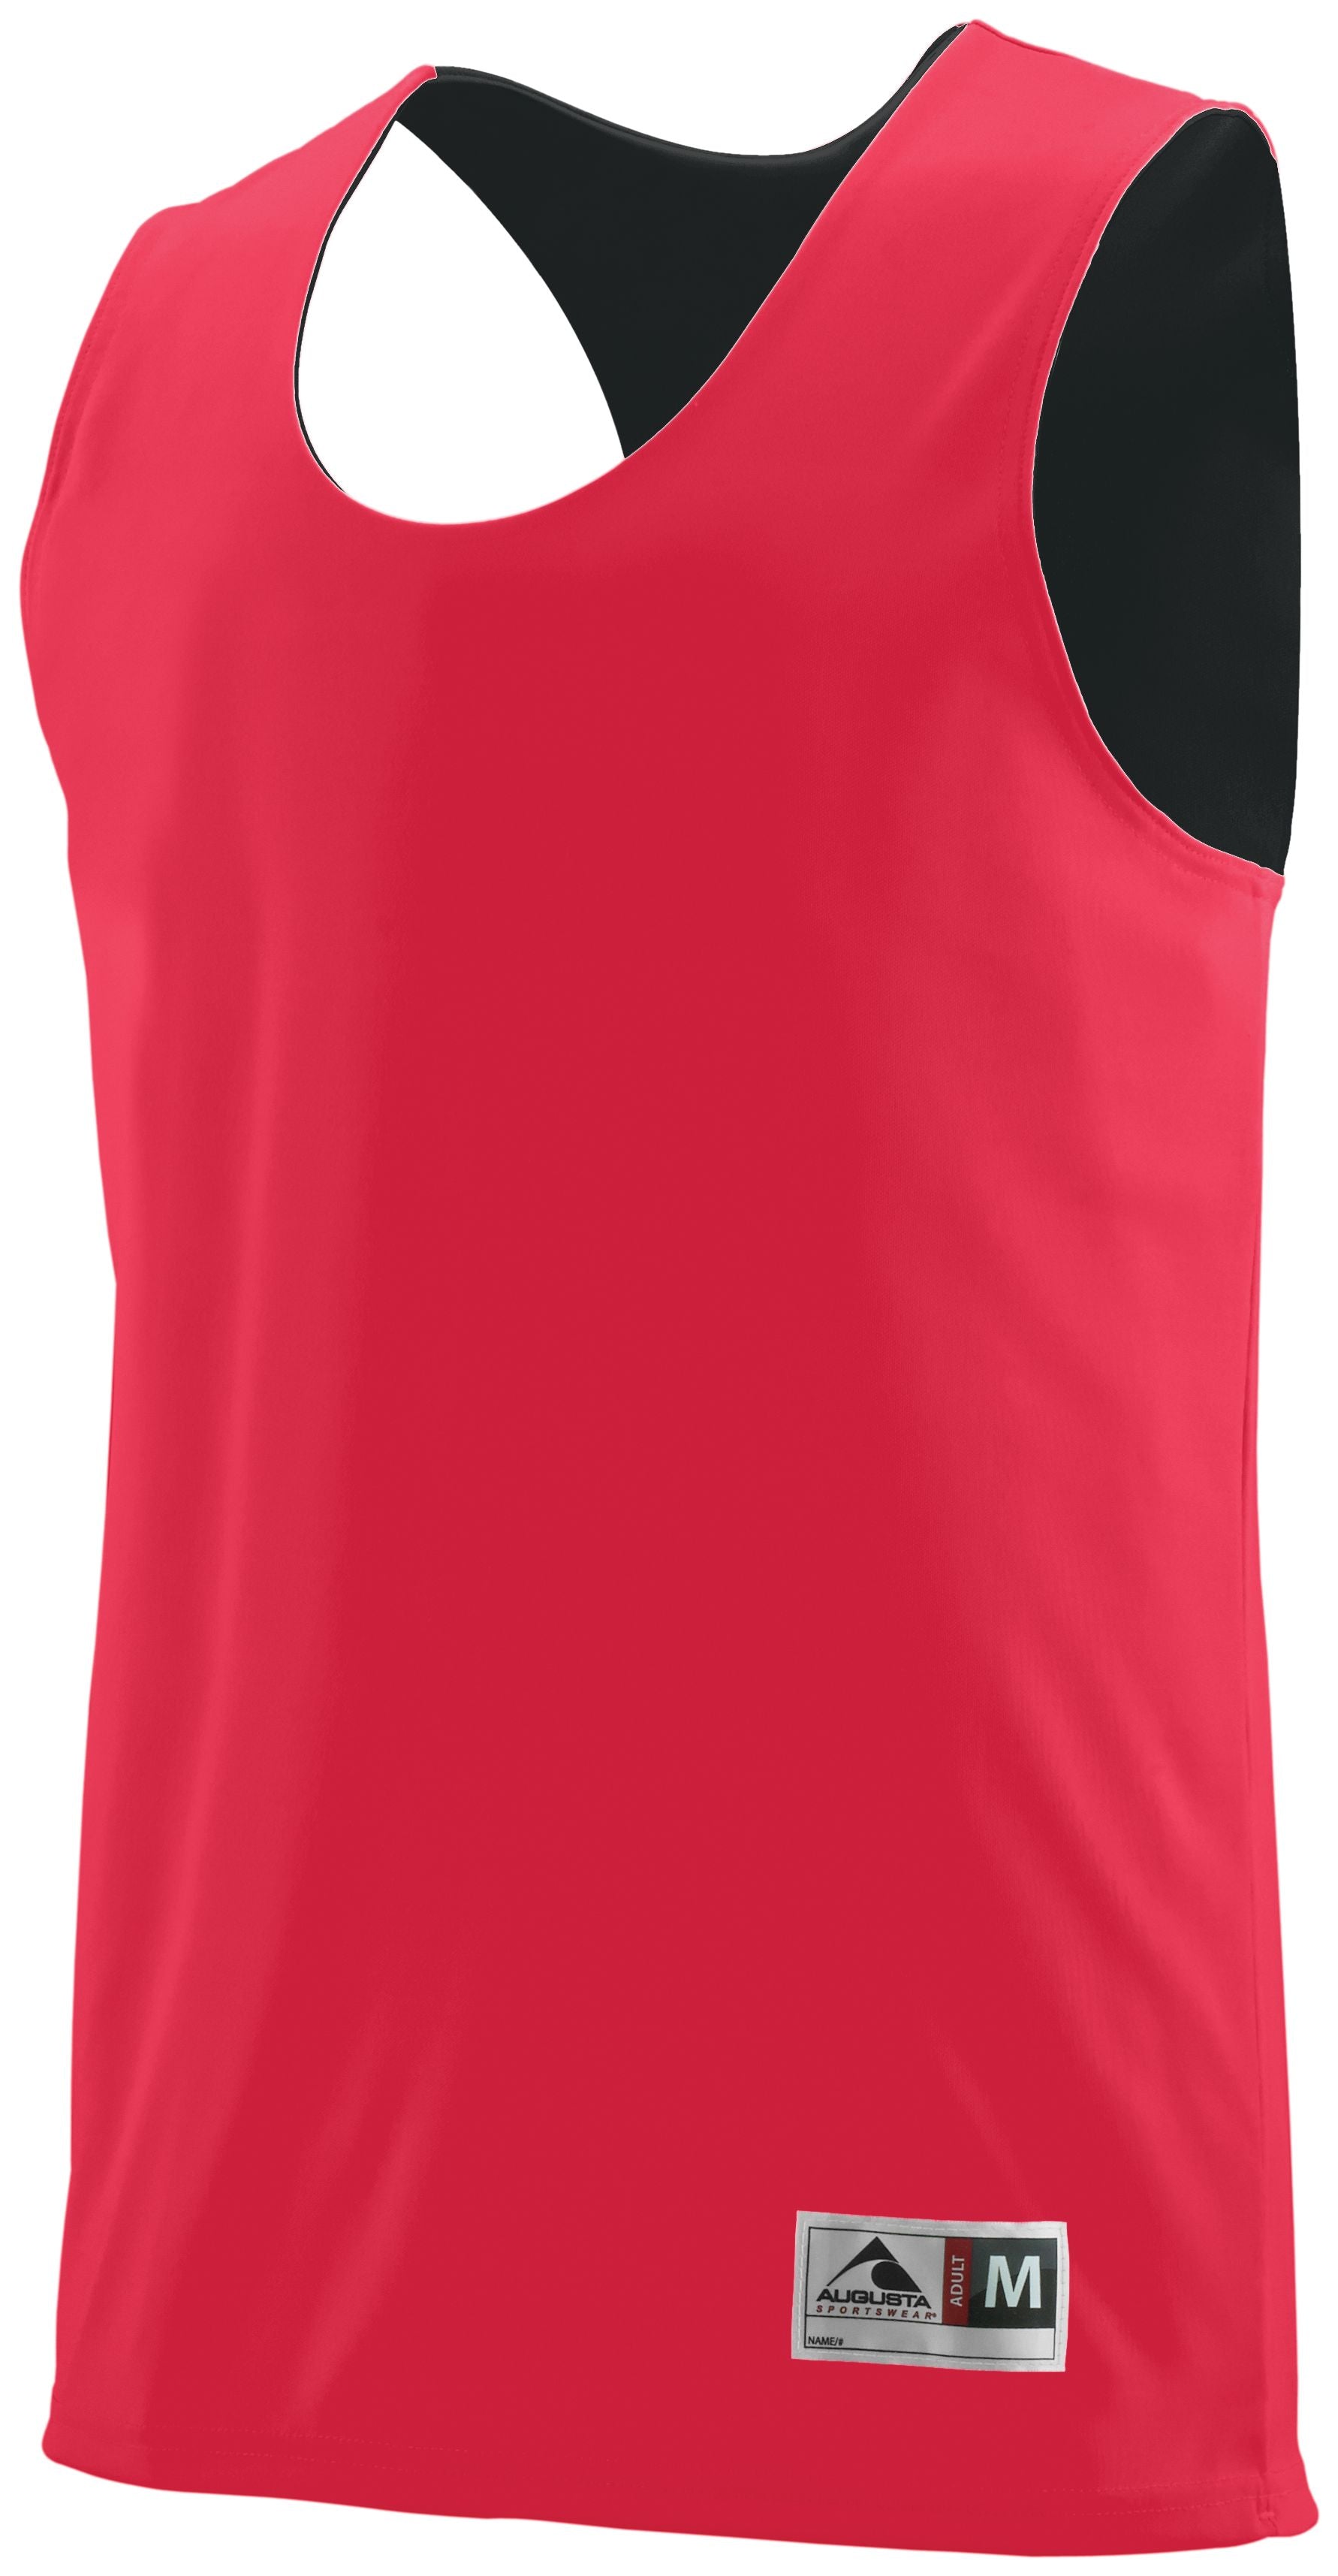 Augusta Sportswear Youth Reversible Wicking Tank in Red/Black  -Part of the Youth, Youth-Tank, Augusta-Products, Basketball, Shirts, All-Sports, All-Sports-1 product lines at KanaleyCreations.com